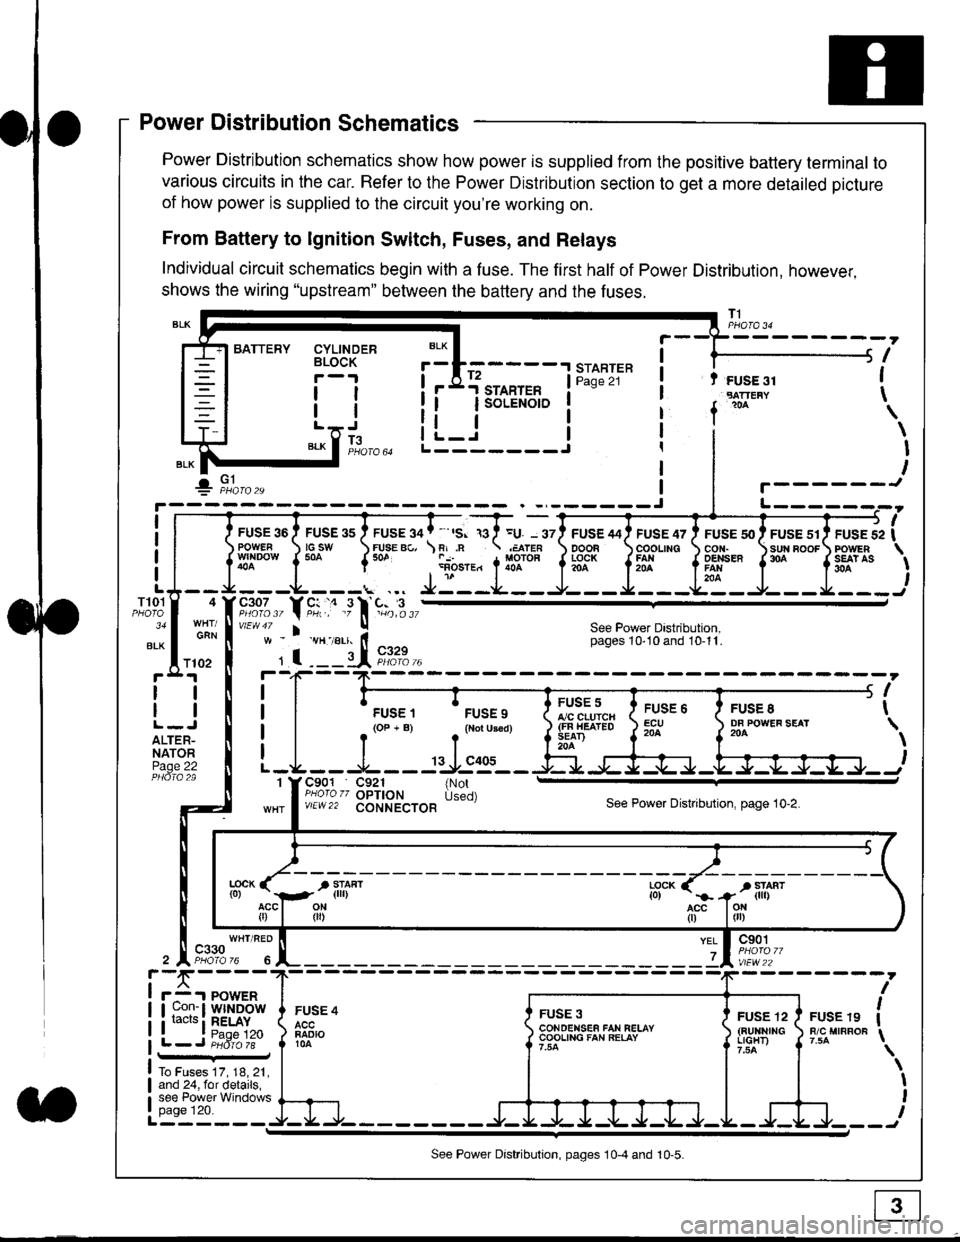 HONDA CIVIC 2000 6.G Owners Manual Power Distribution Schematics
Power Distribution schematics show how power is supplied from the positive battery terminal to
various circuits in the car. Refer to the Power Distribution section to get